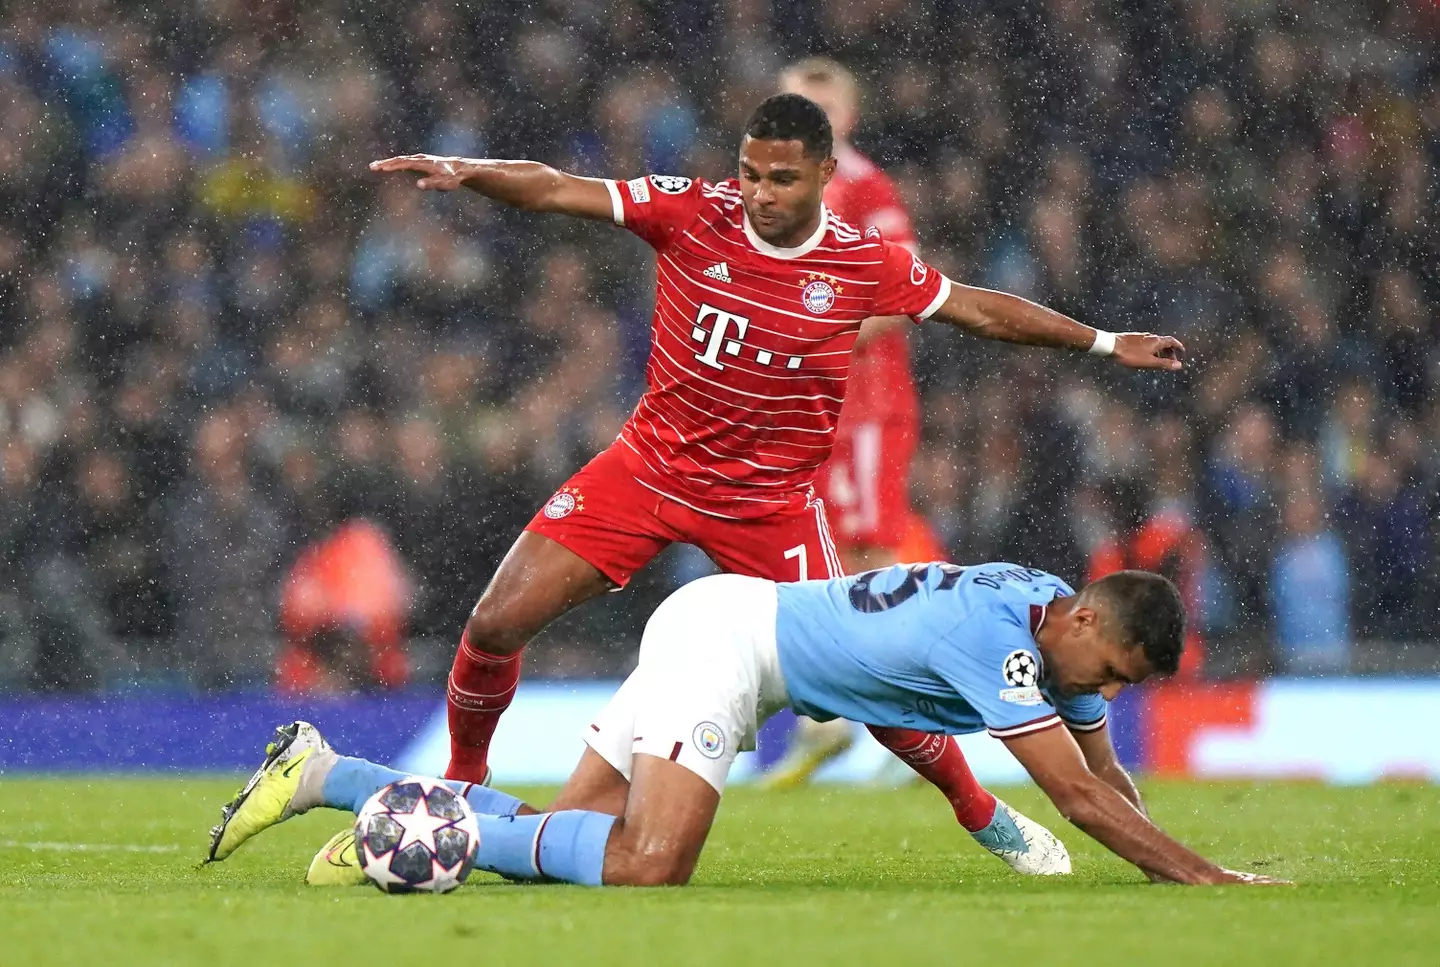 Bayern Munich's Serge Gnabry in action during the Champions League quarter-final first leg against Manchester City (